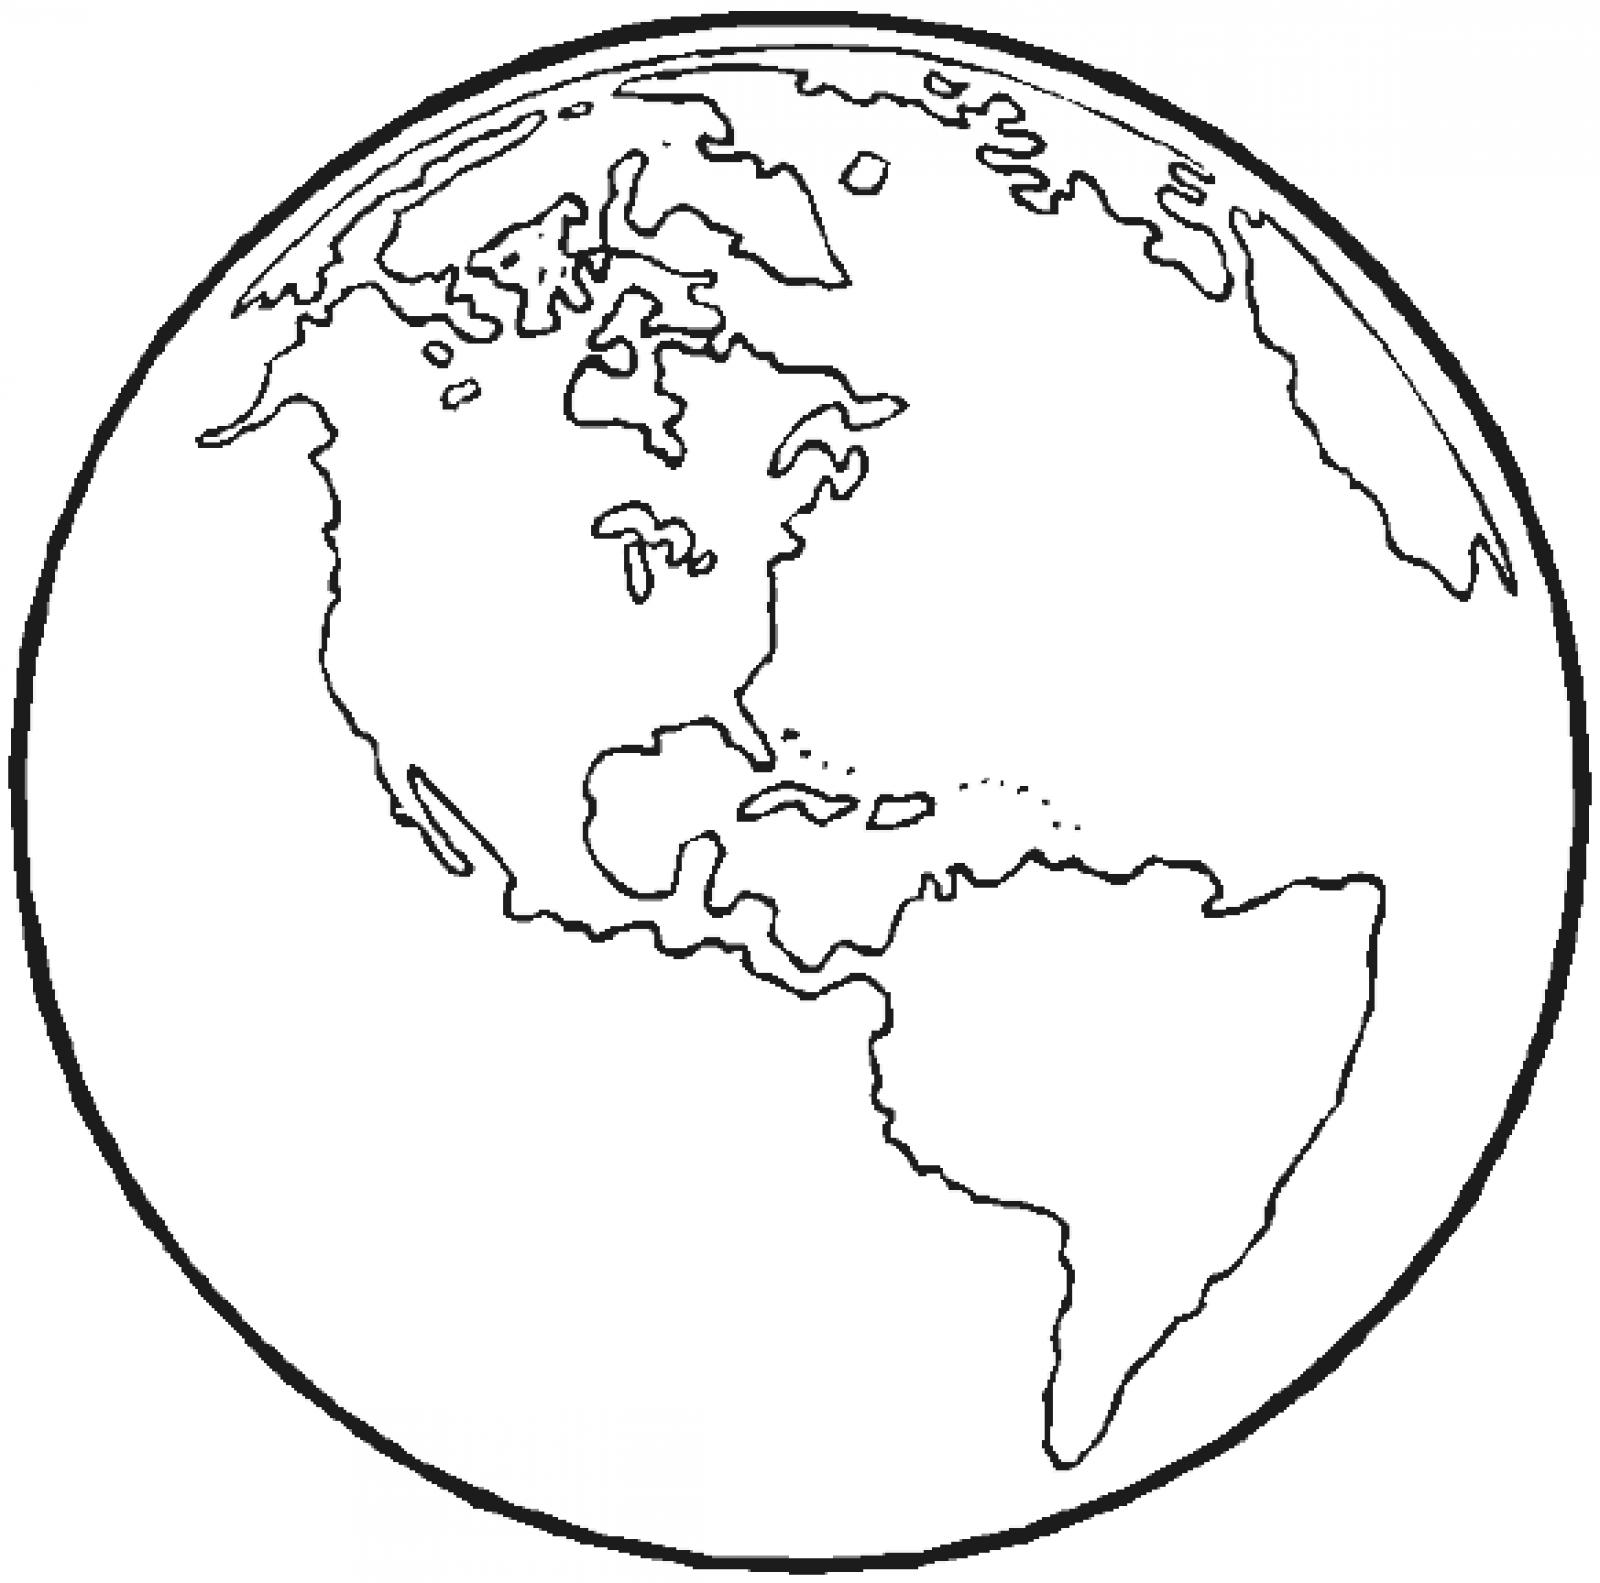  Earth Coloring Pages 7